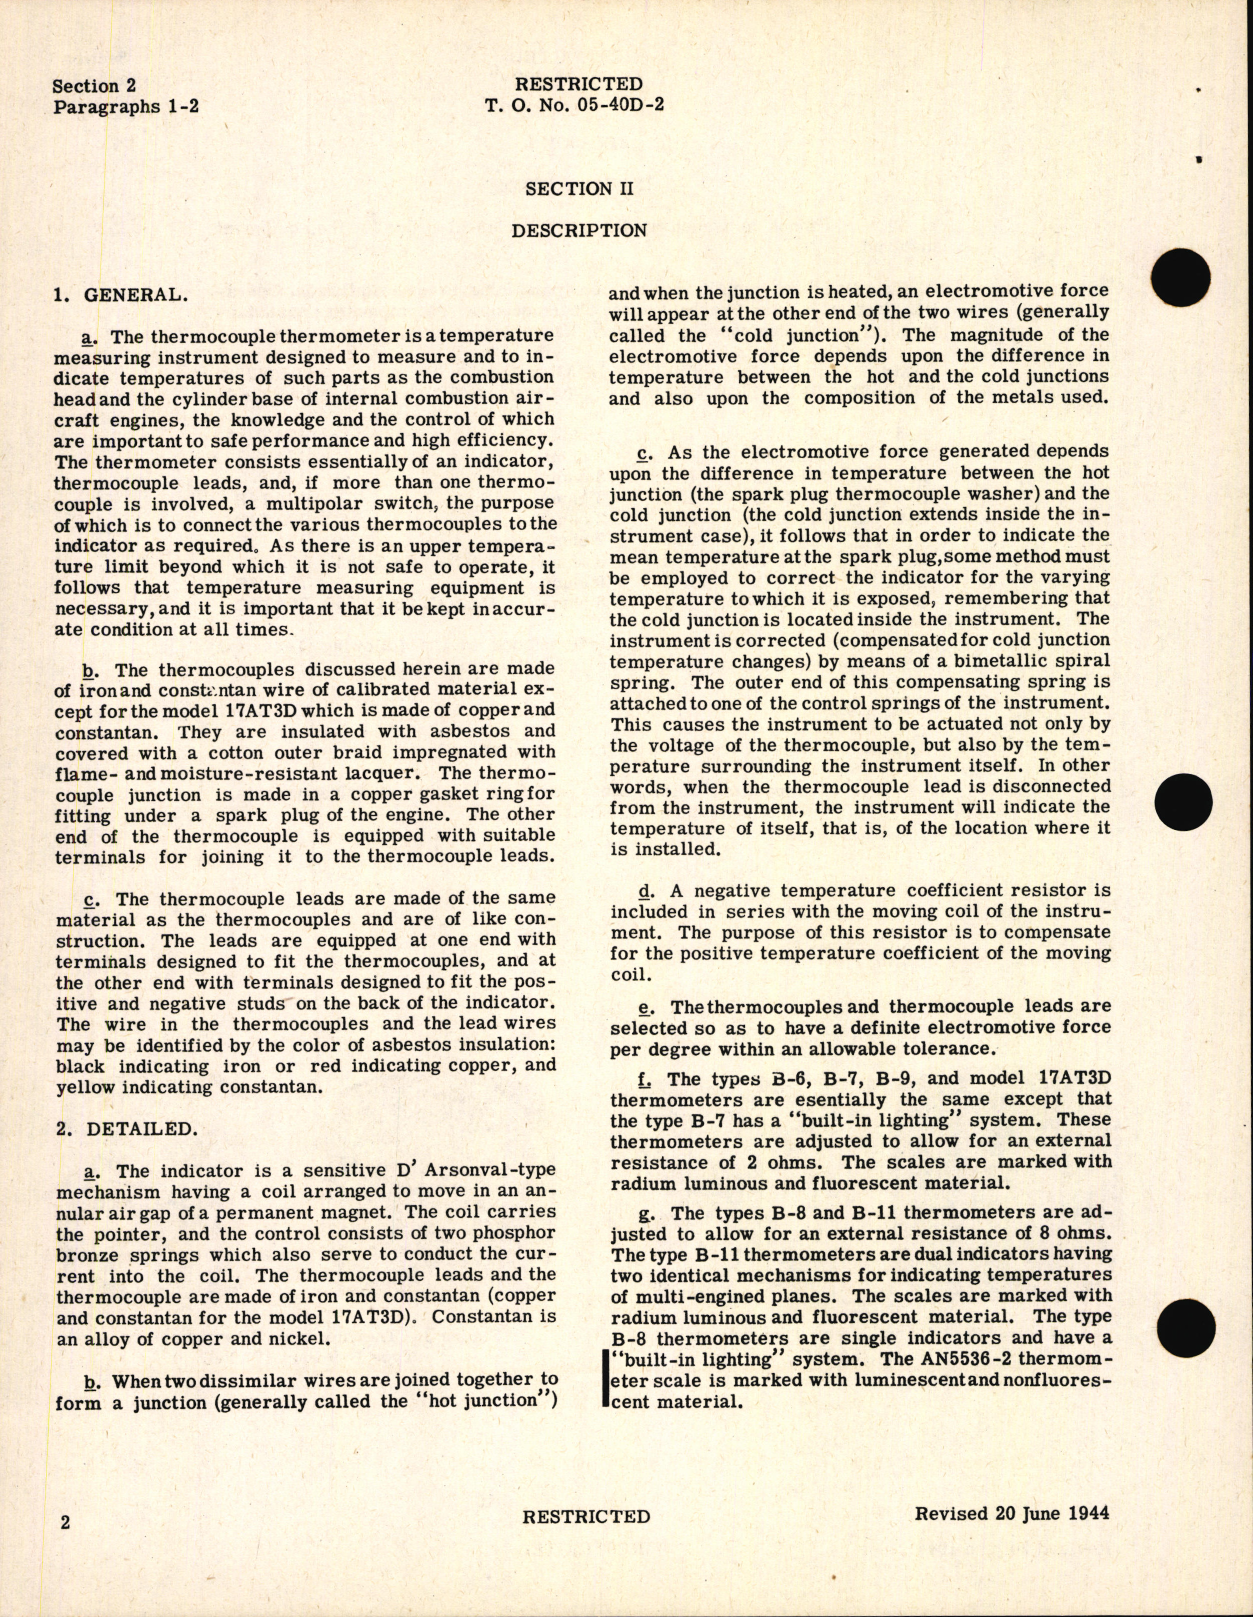 Sample page 6 from AirCorps Library document: Handbook of Instructions with Parts Catalog for Thermocouple Thermometers